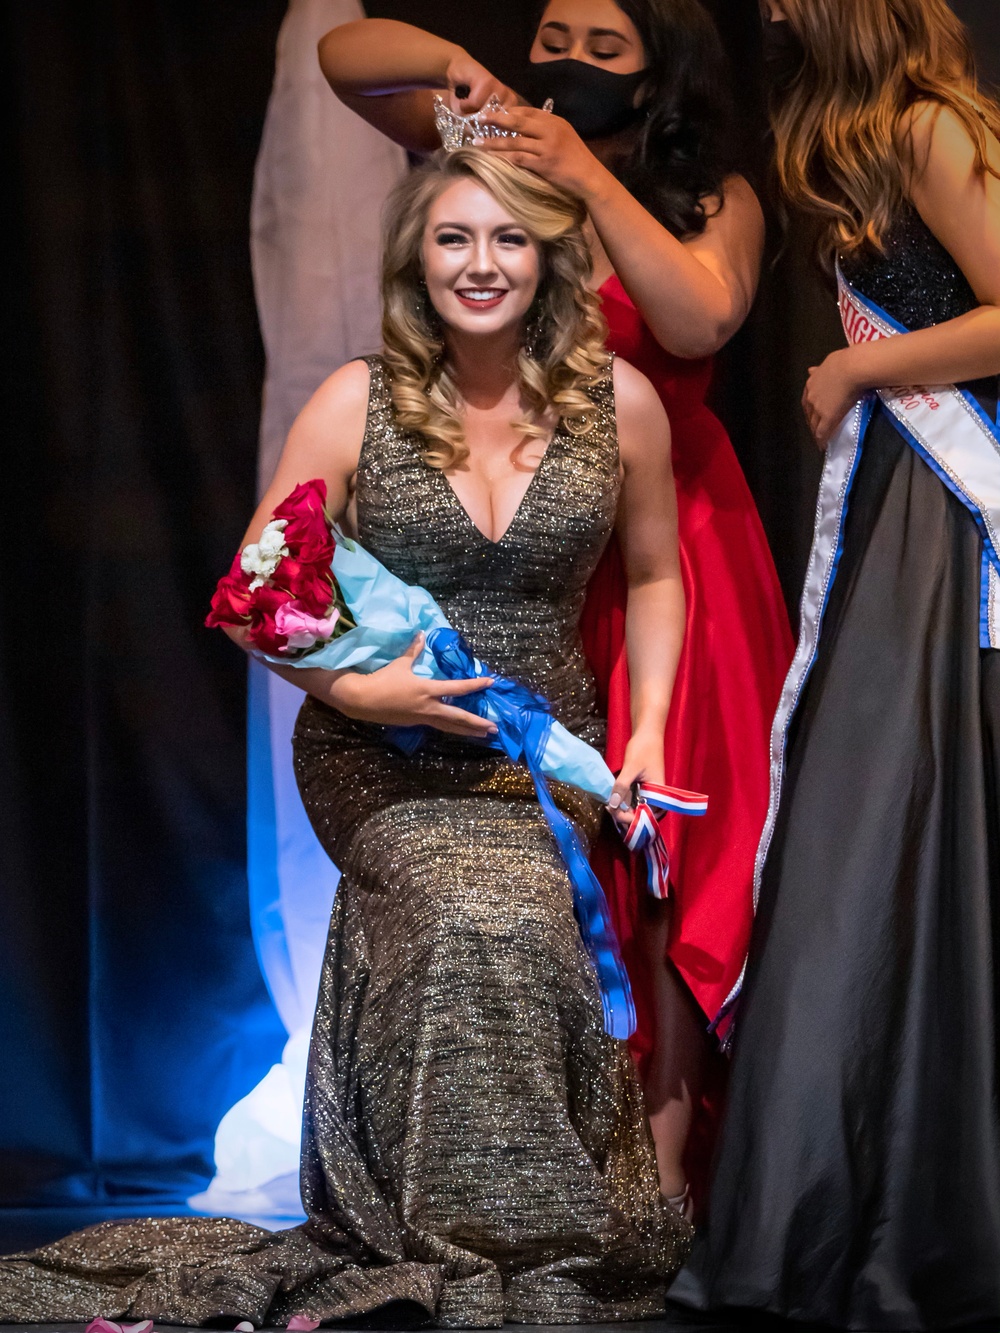 Alaska Air Guardsman advocates for military, STEM careers for women in pageant win